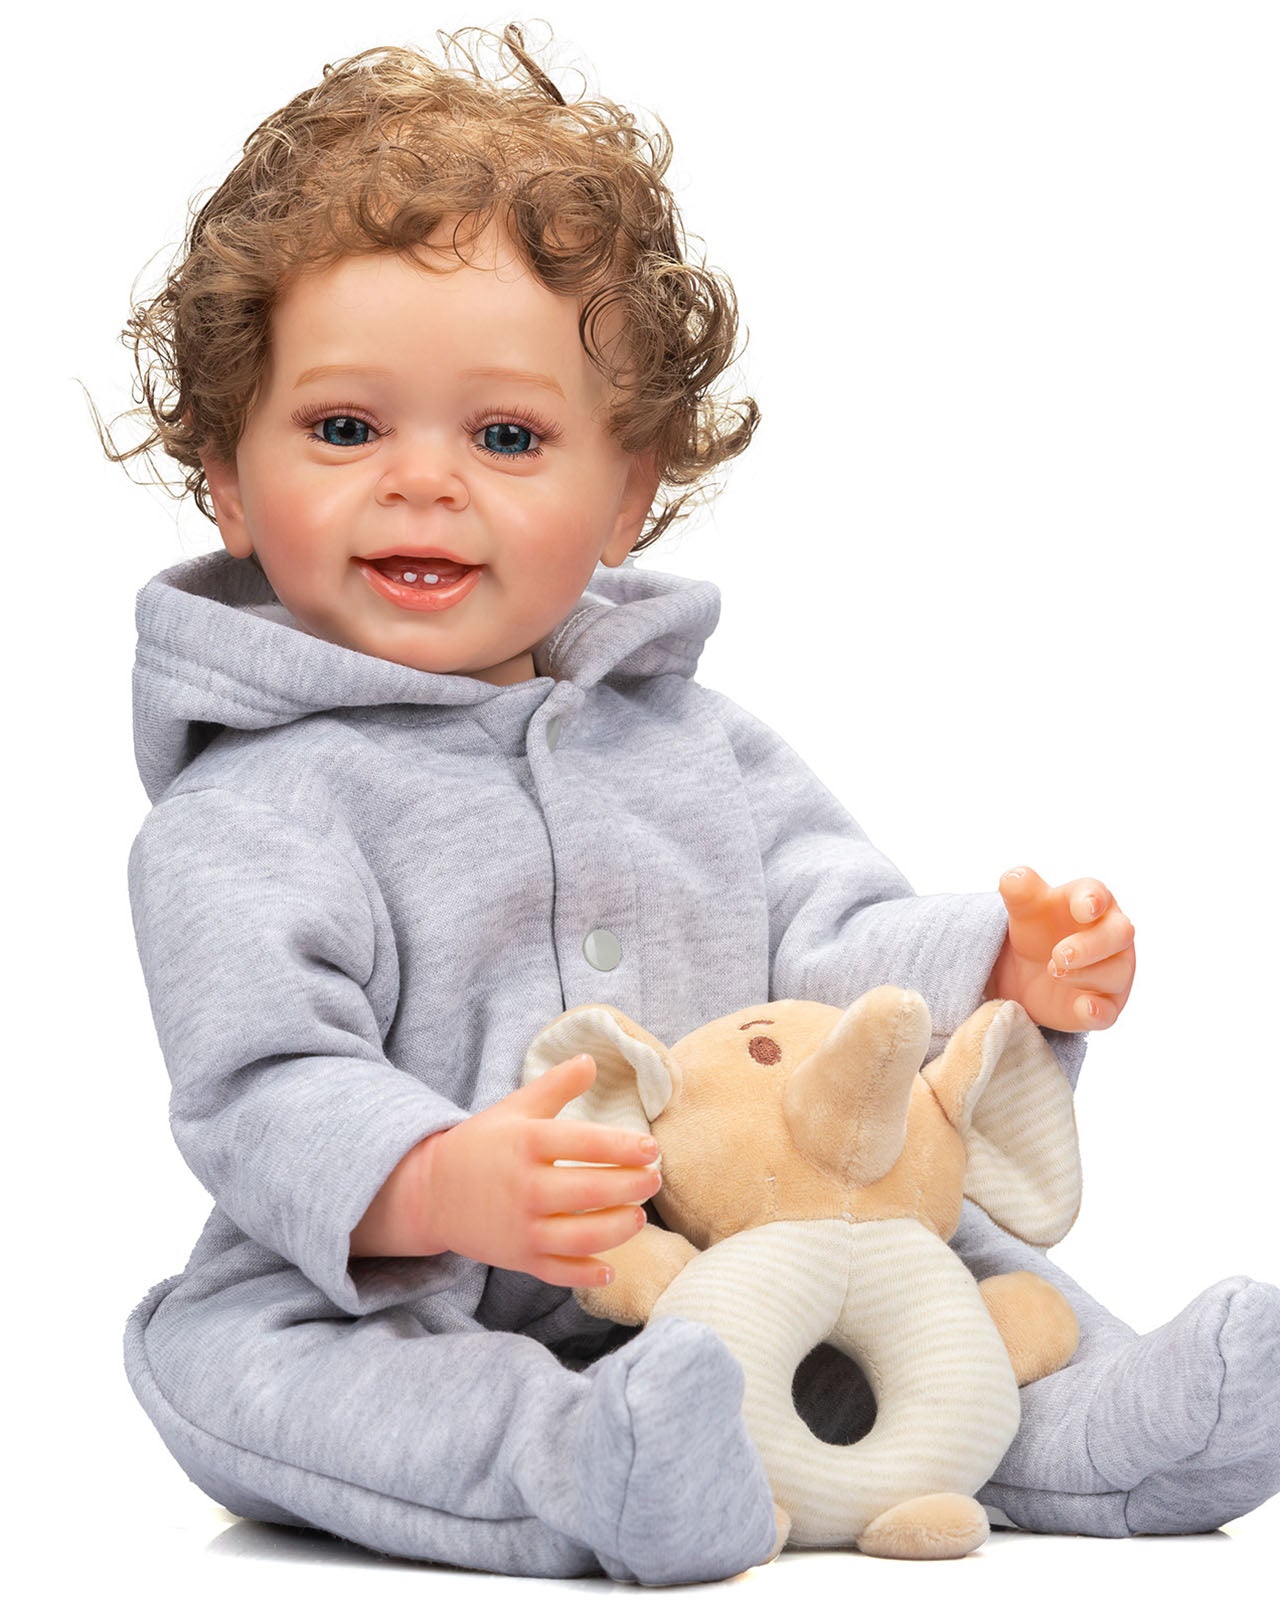 Carter - 22" Reborn Baby Dolls Flexible Soft Touch Cuddly Toddlers Boy with Adorable Milk Teeth